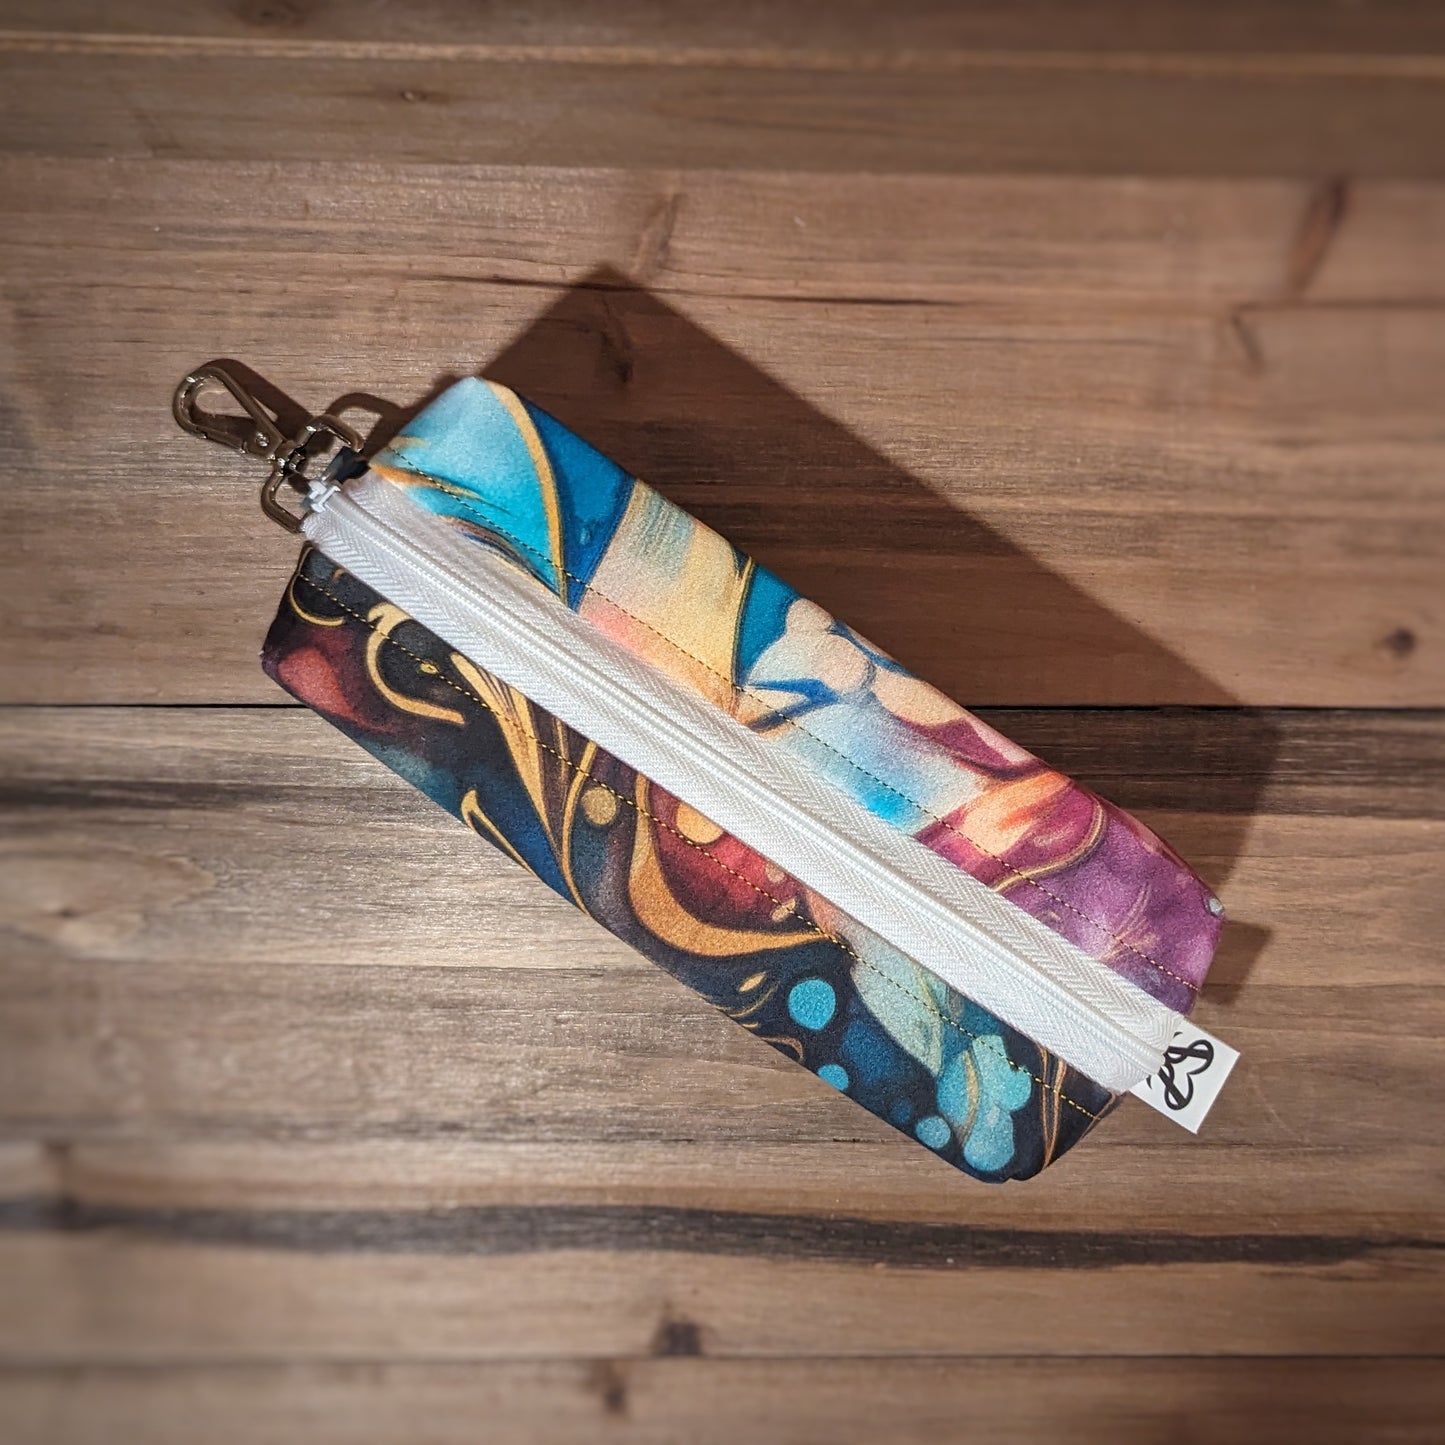 A wide square case with swirling rainbow colors outside and a white zipper up the middle and a keychain clip at the top.